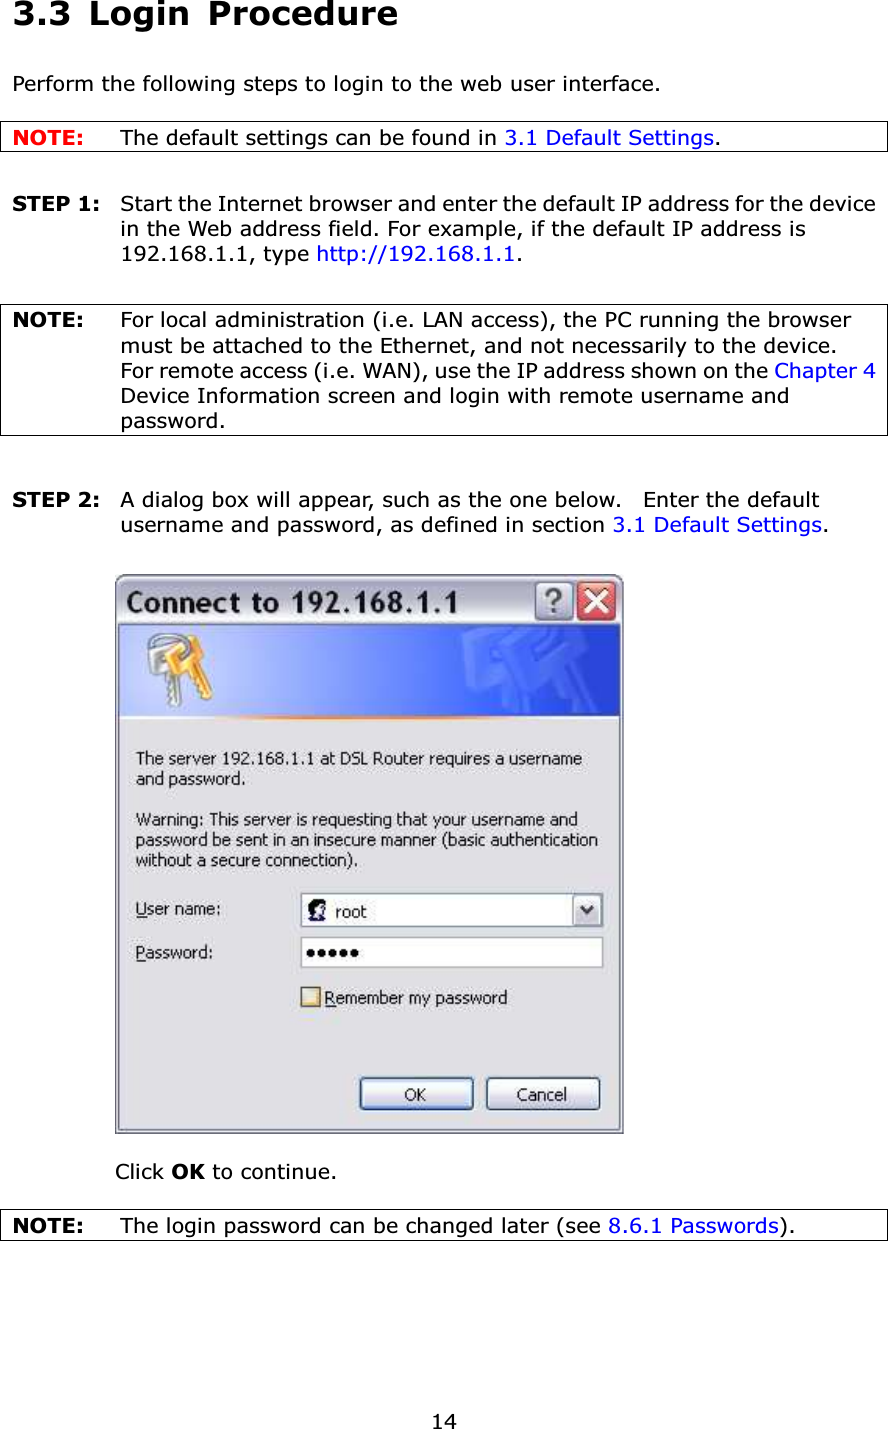  143.3 Login Procedure Perform the following steps to login to the web user interface.      NOTE:  The default settings can be found in 3.1 Default Settings.     STEP 1:   Start the Internet browser and enter the default IP address for the device in the Web address field. For example, if the default IP address is 192.168.1.1, type http://192.168.1.1.  NOTE:  For local administration (i.e. LAN access), the PC running the browser must be attached to the Ethernet, and not necessarily to the device.     For remote access (i.e. WAN), use the IP address shown on the Chapter 4 Device Information screen and login with remote username and password.  STEP 2:   A dialog box will appear, such as the one below.    Enter the default username and password, as defined in section 3.1 Default Settings.      Click OK to continue.  NOTE:    The login password can be changed later (see 8.6.1 Passwords).      